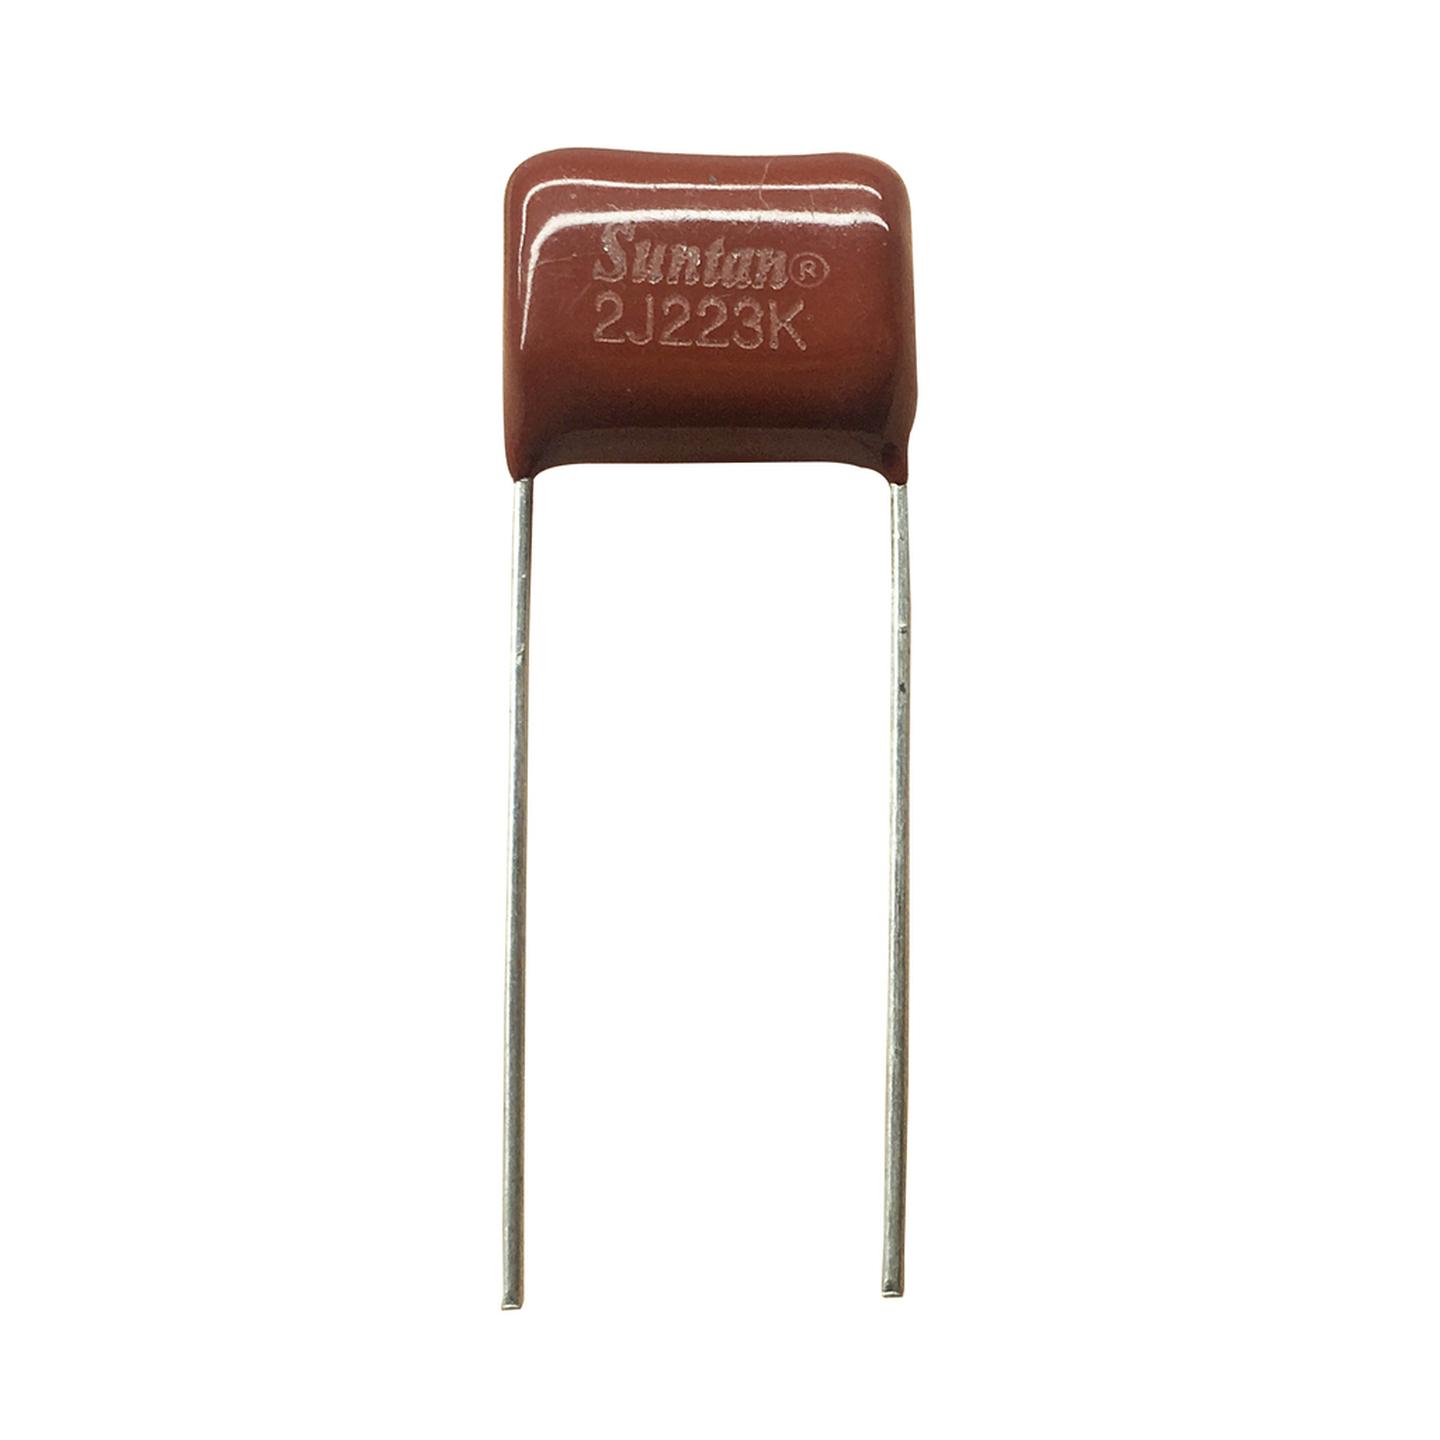 22nF 630VDC Polyester Capacitor